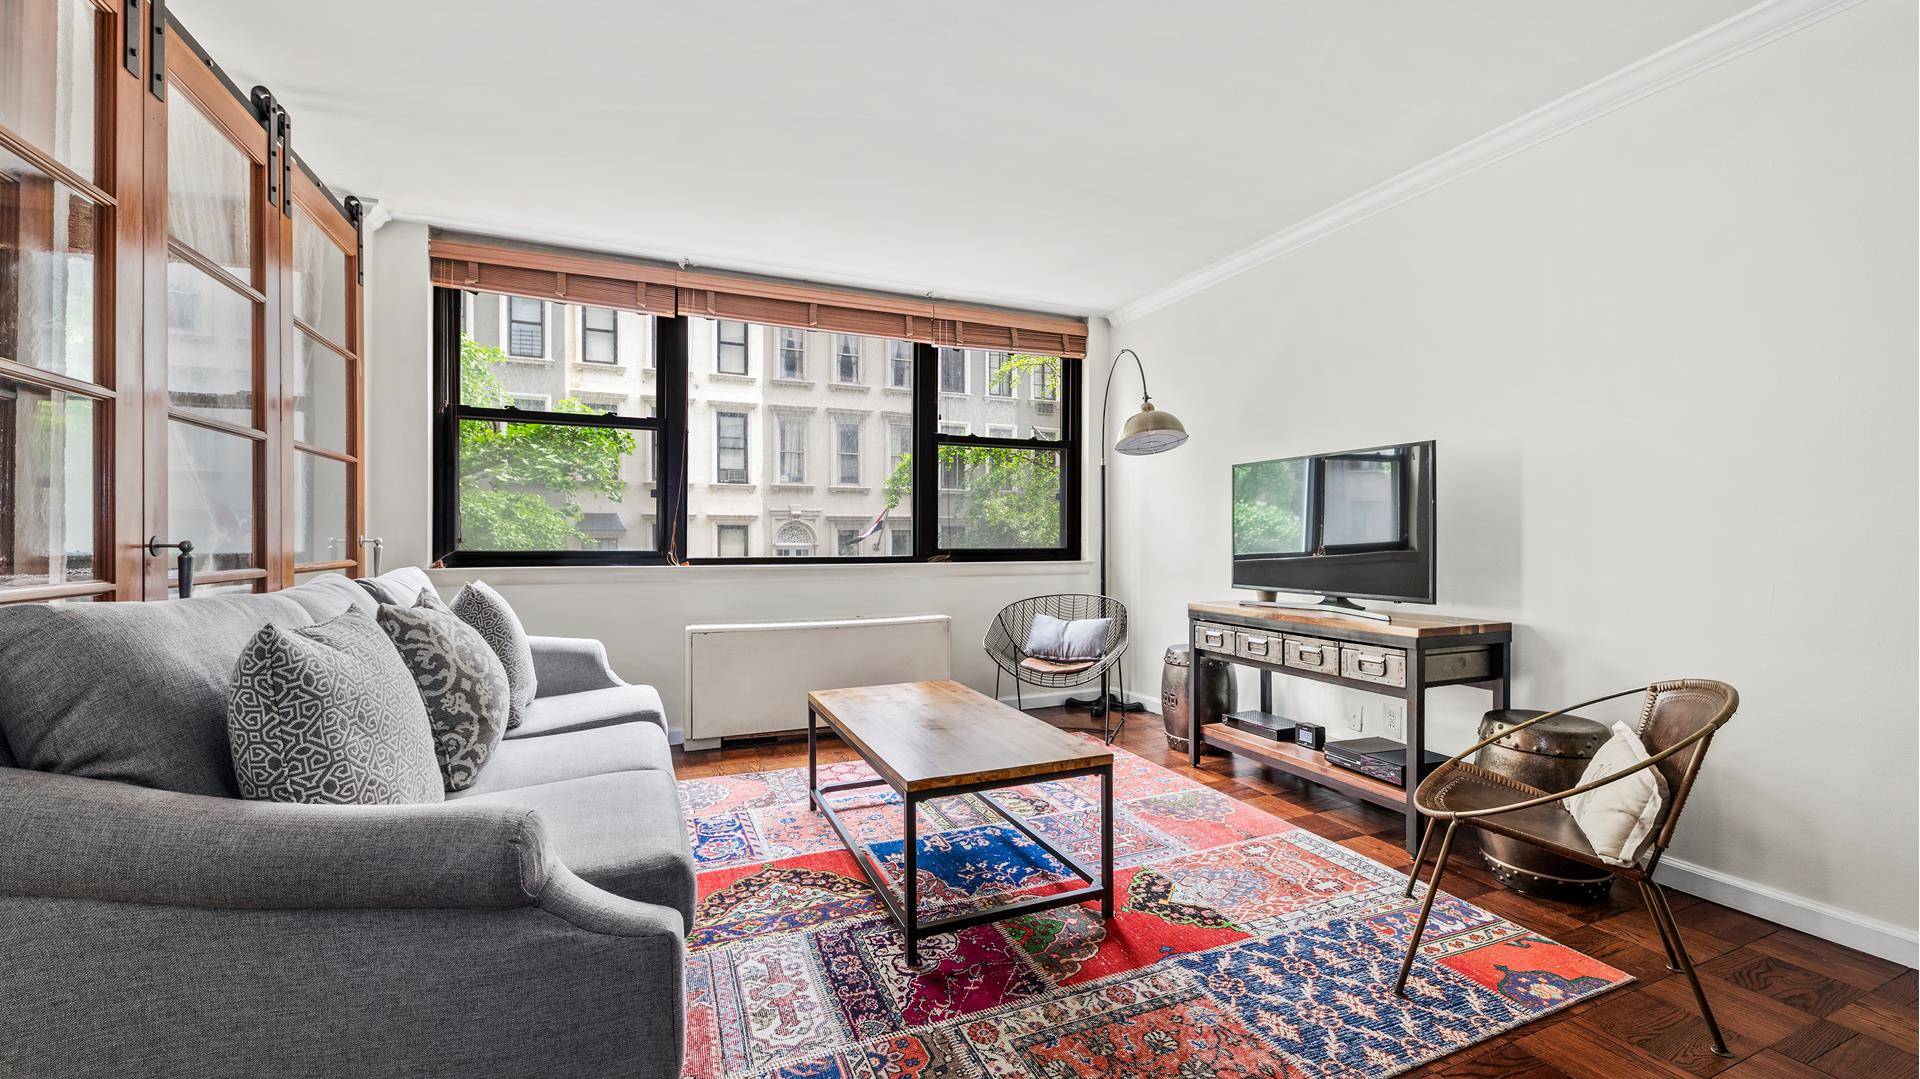 Unit 3G at 420 East 51st street is a huge one bedroom apartment with home office with corner northern and western views.